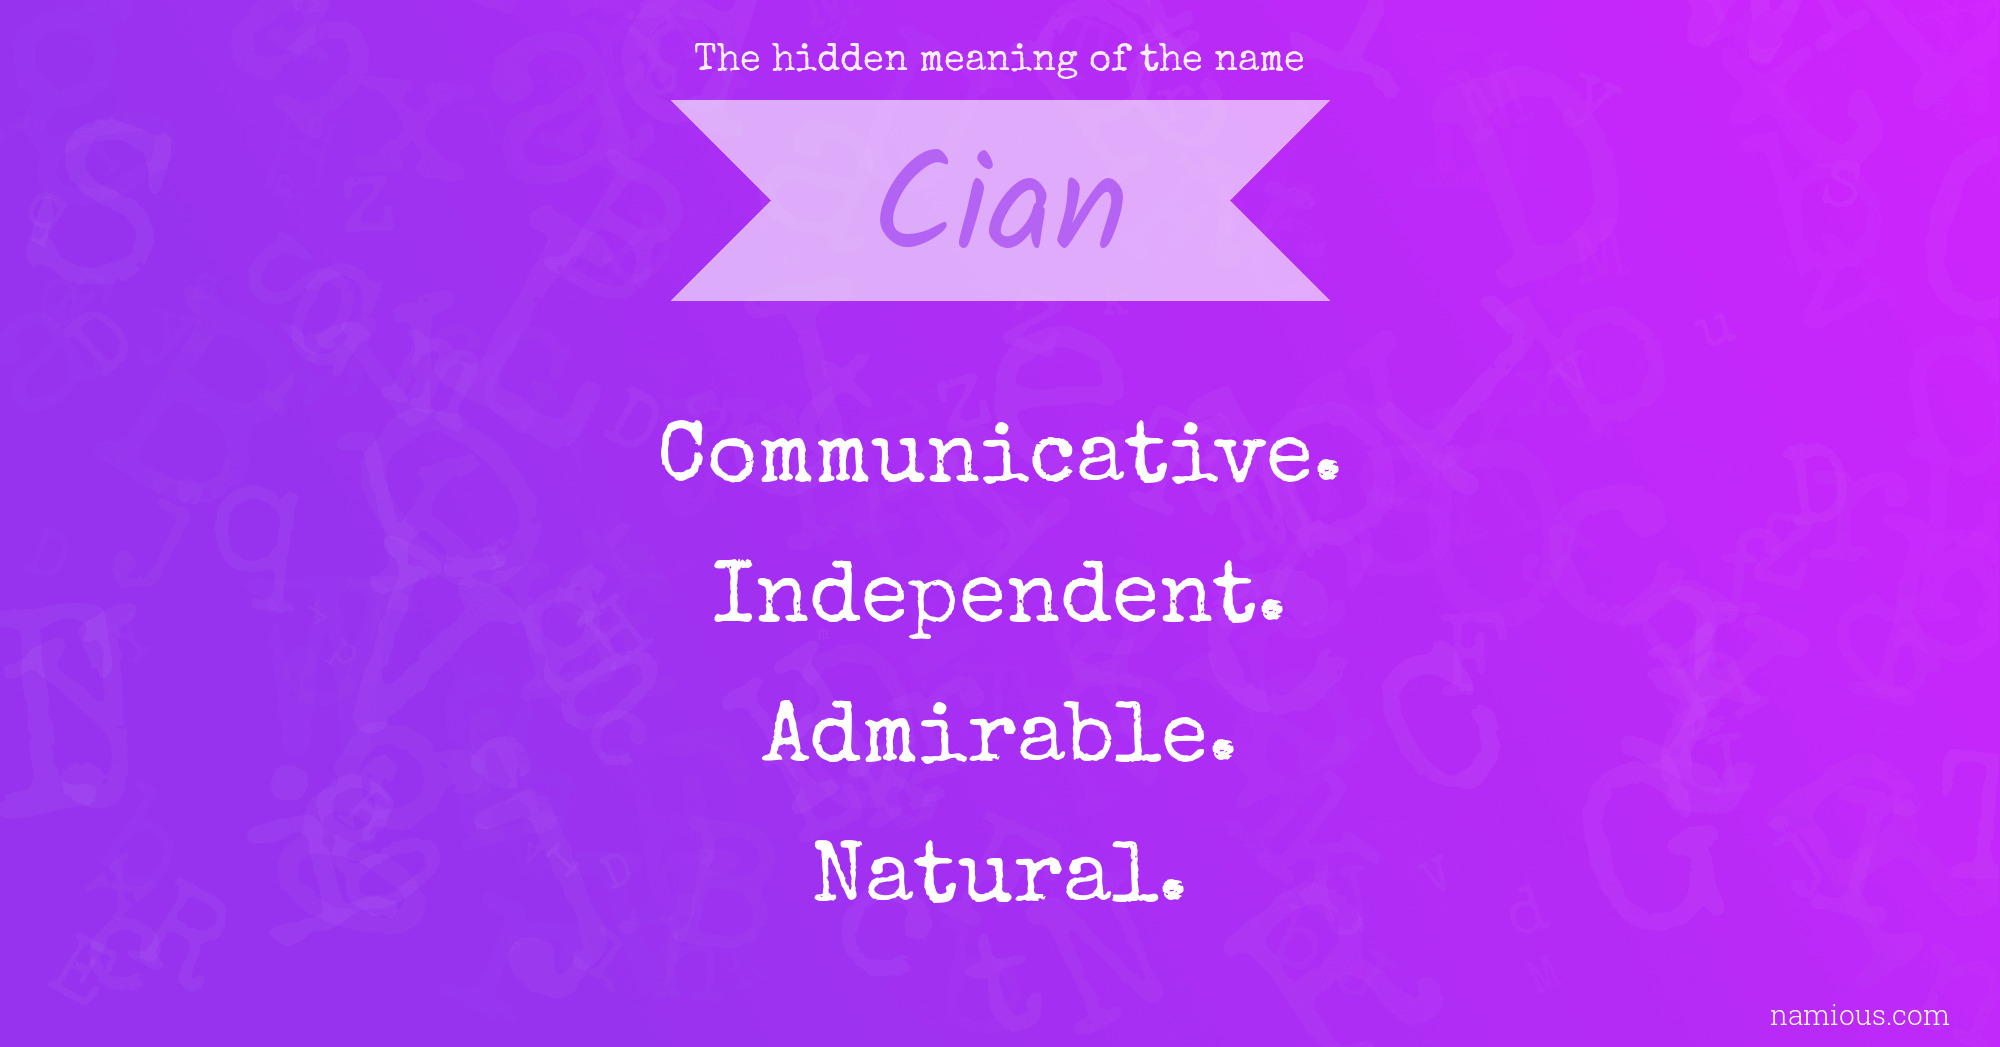 The hidden meaning of the name Cian